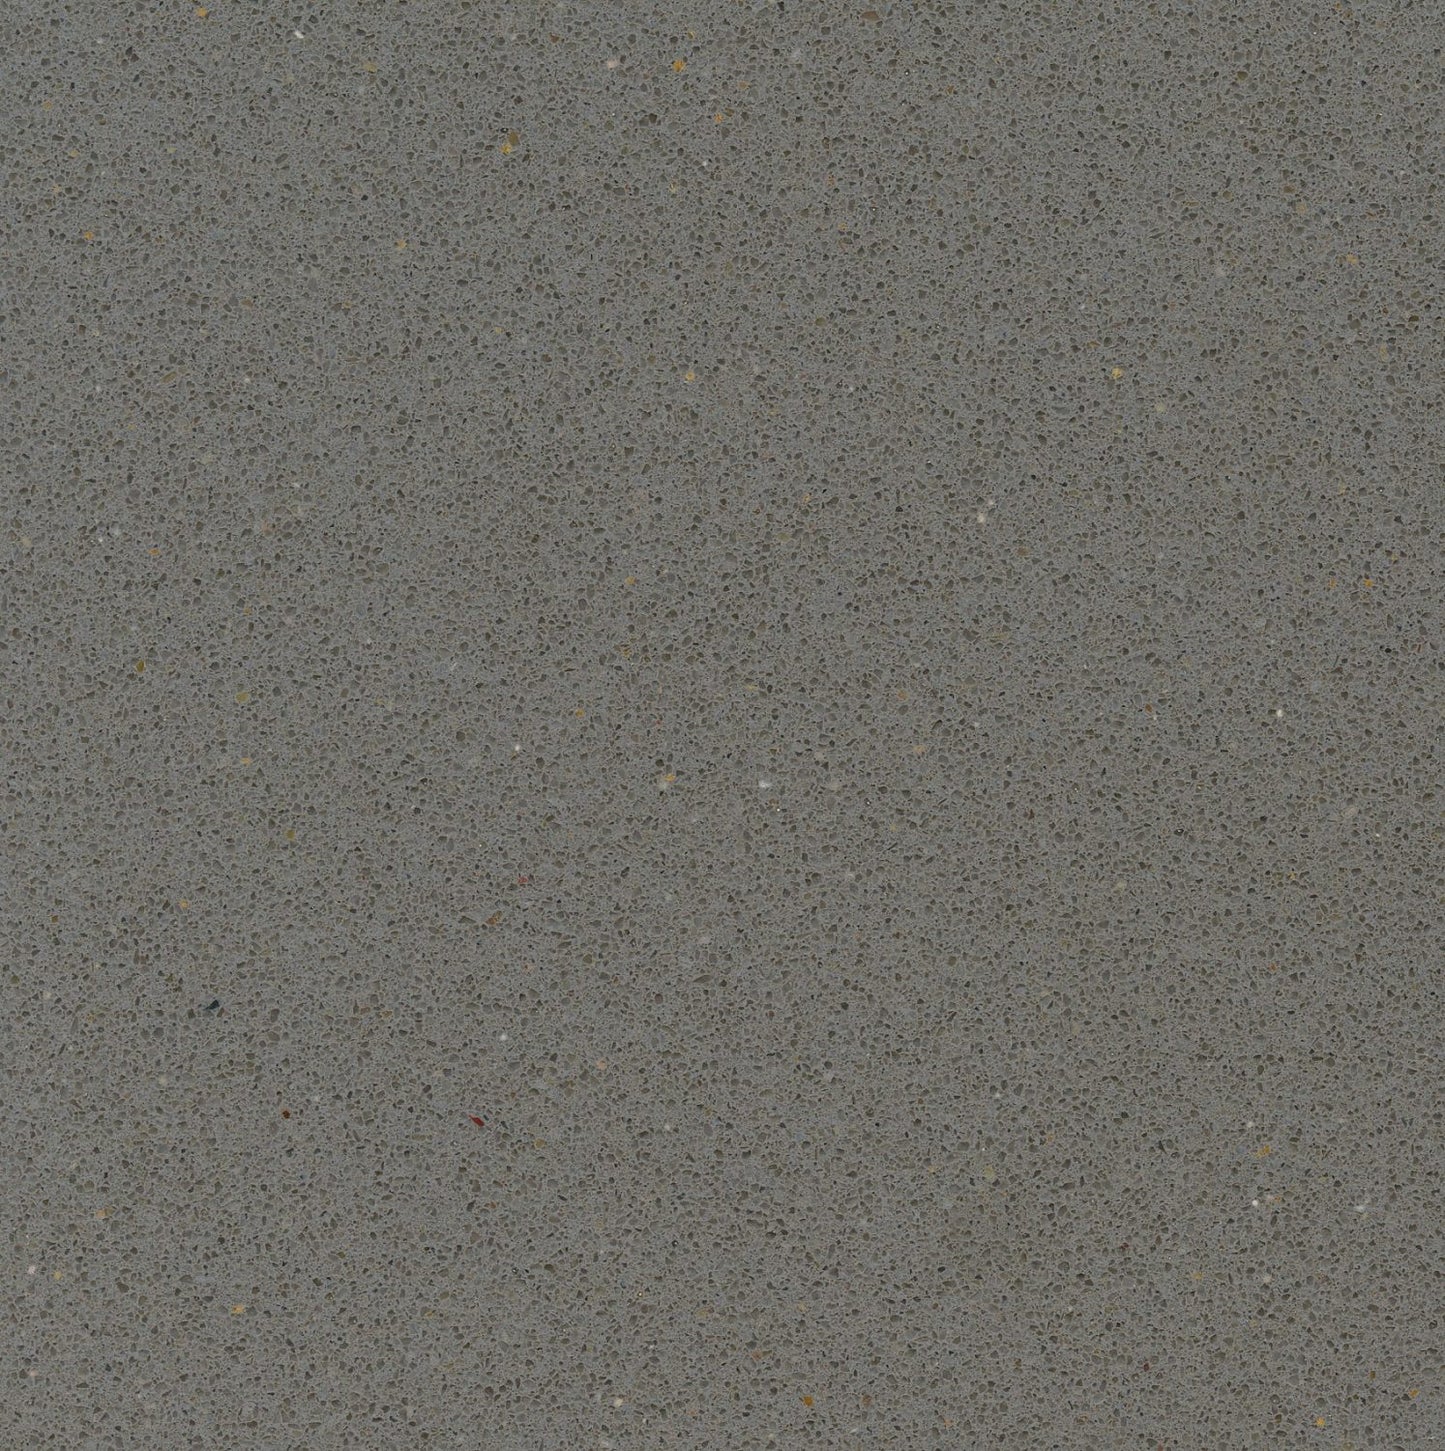 【SILESTONE】Italian Engineering Stone Work Surface - Standard Collection | Made in Spain |